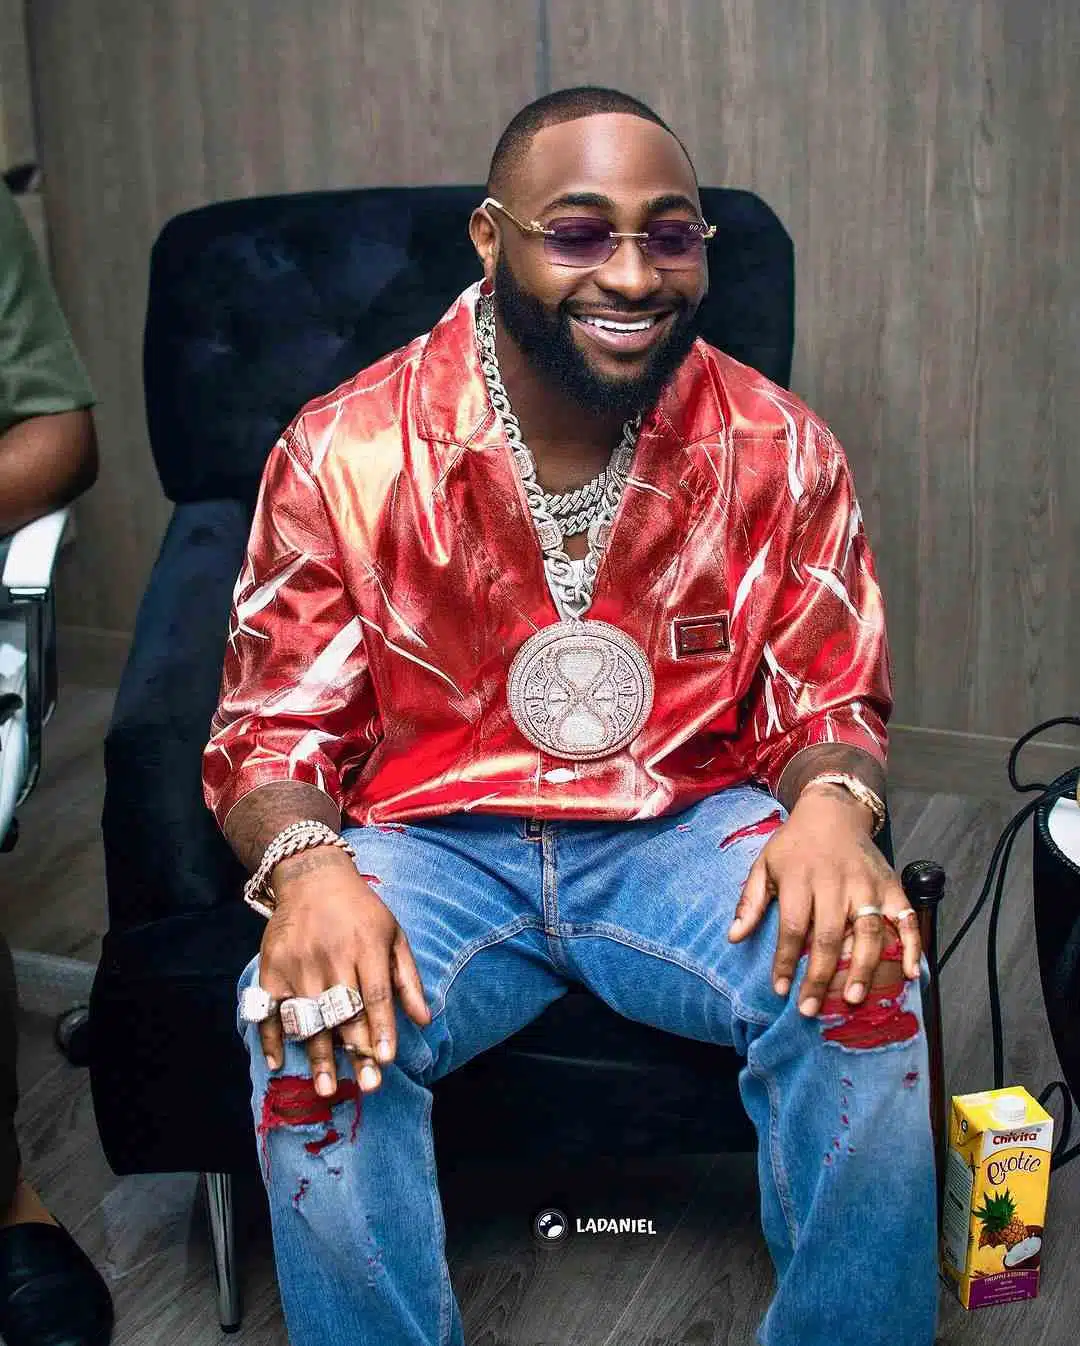 “I can’t be messed with” – Davido warns as he steps out rocking N577 million diamond pendant